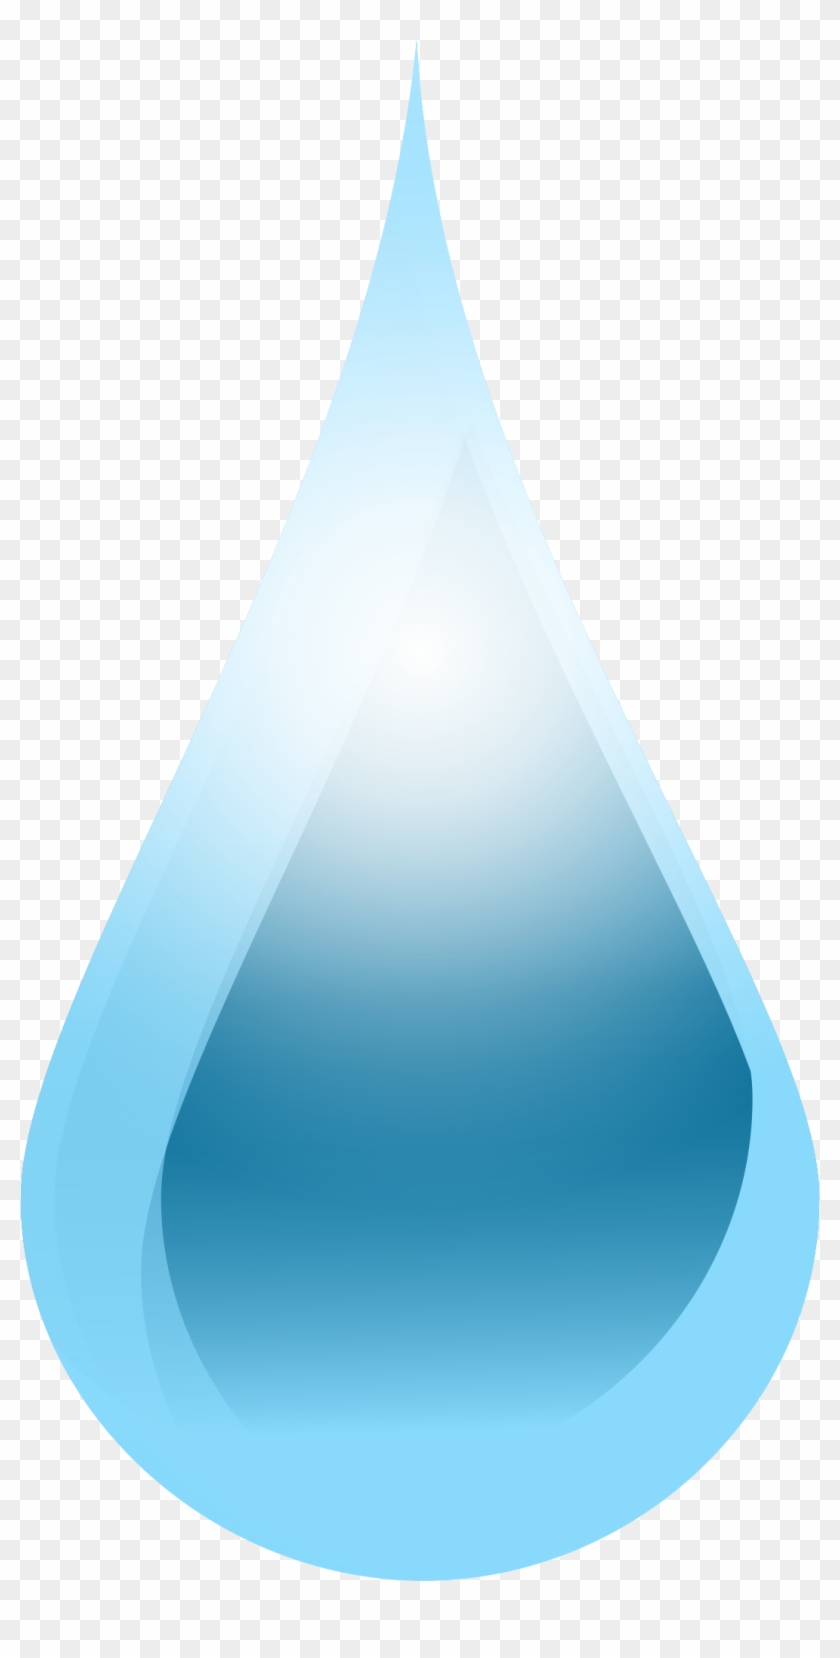 Png Transparent Library Drop Image Png - Water Drop Clipart #422475